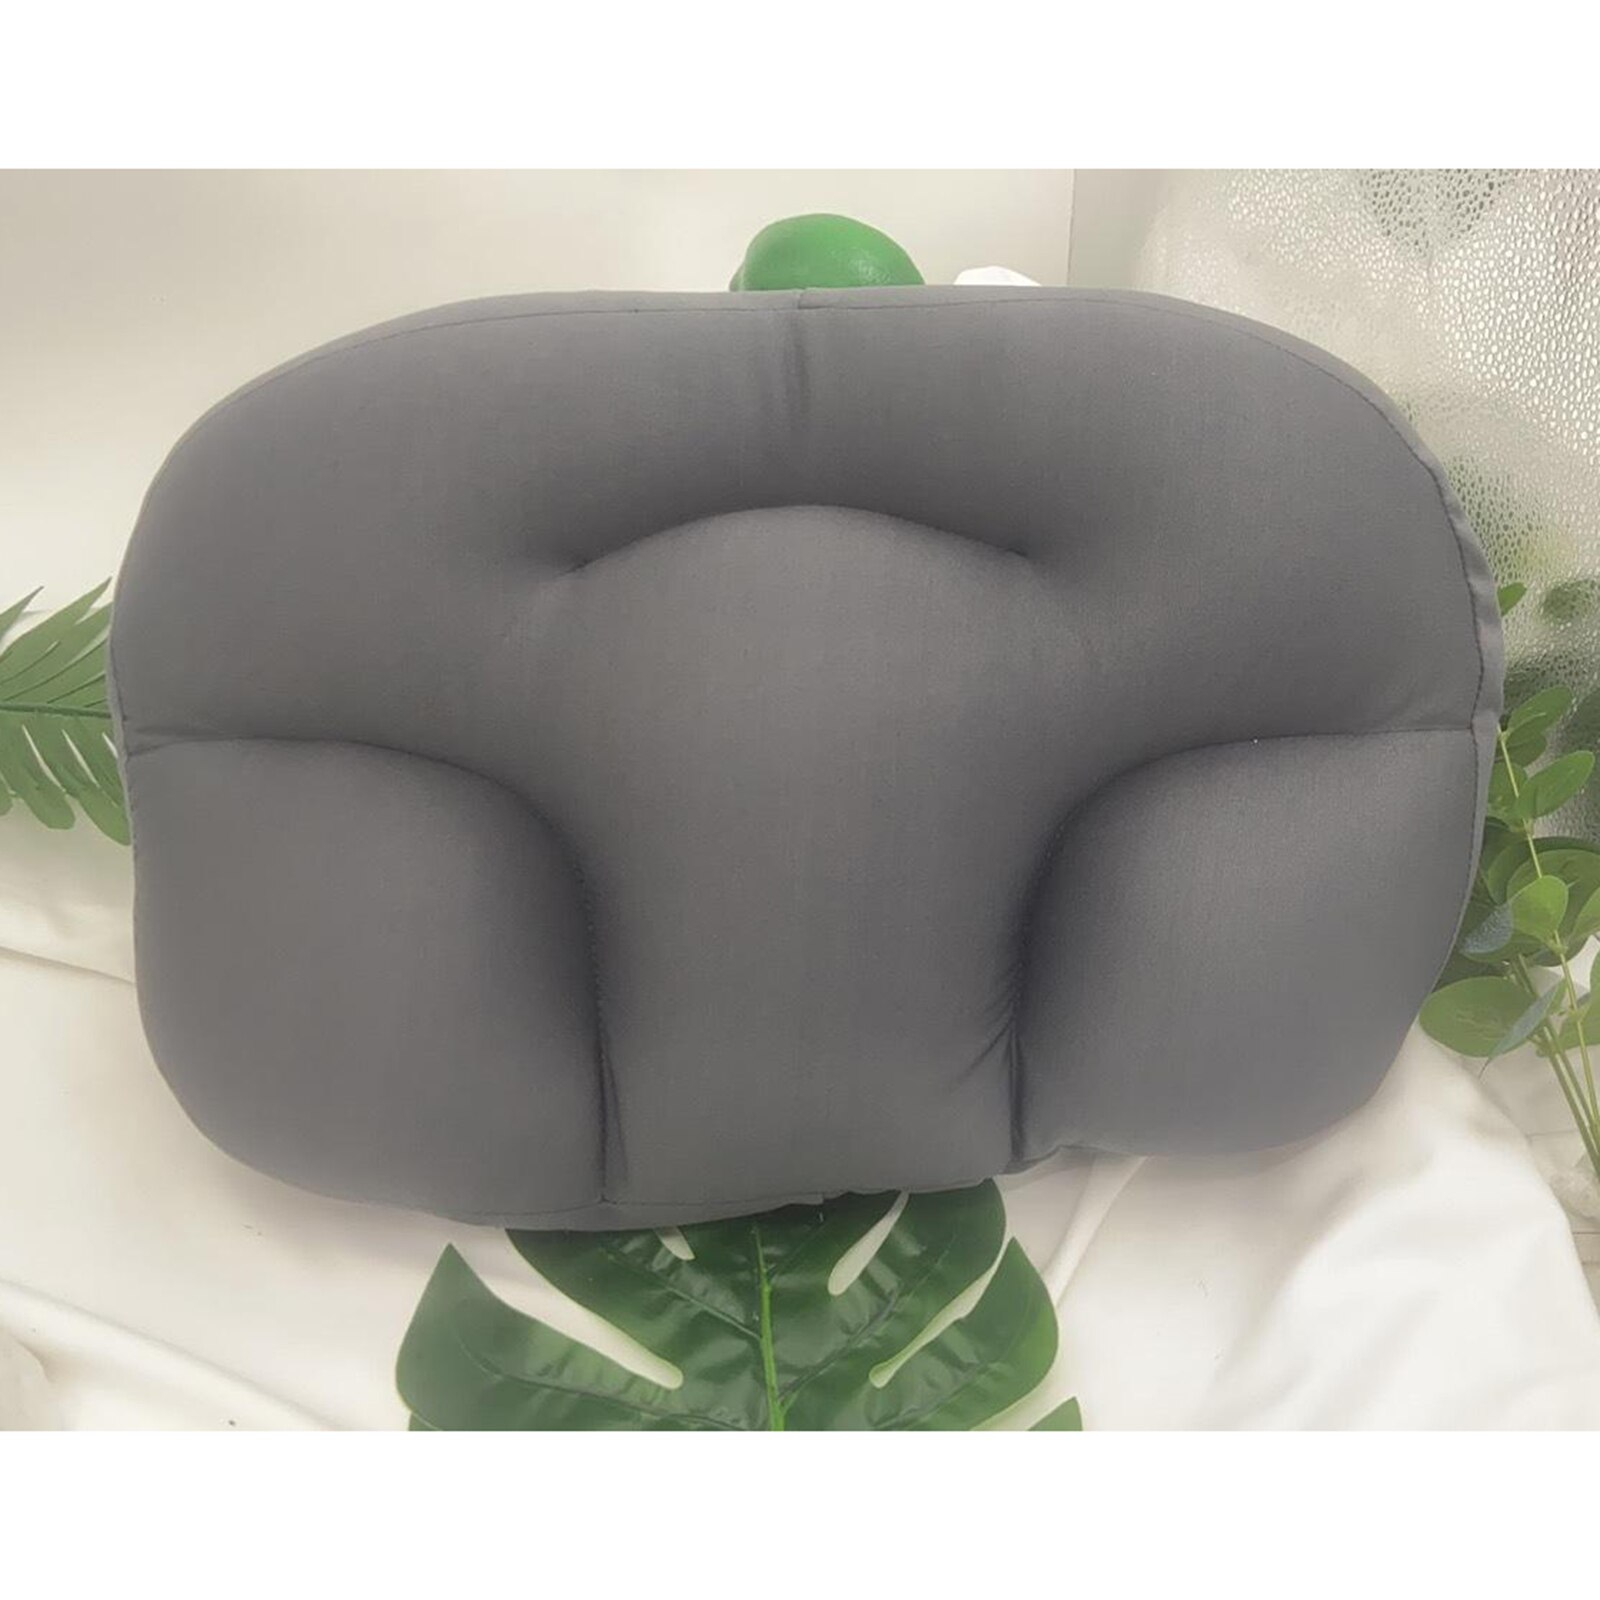 Memory Foam Pillow Hypoallergenic Ergonomic Adjustable Contour pillow Orthopedic Pillow for Neck Pain Support and Side Sleepers: Dark Gray